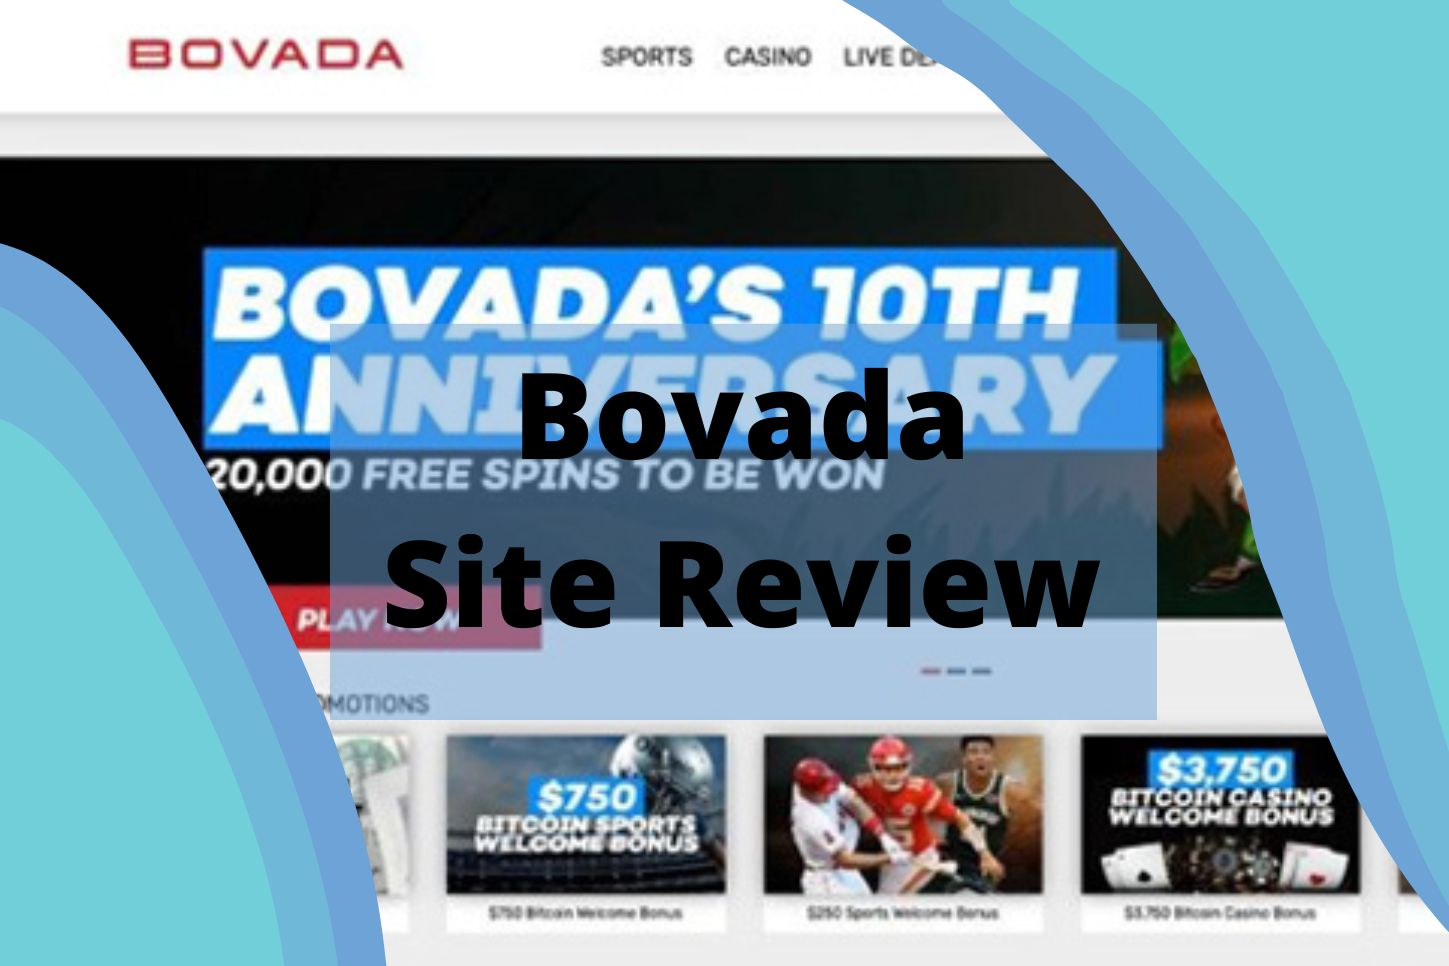 bet on sport and make money with Bovada Site in India